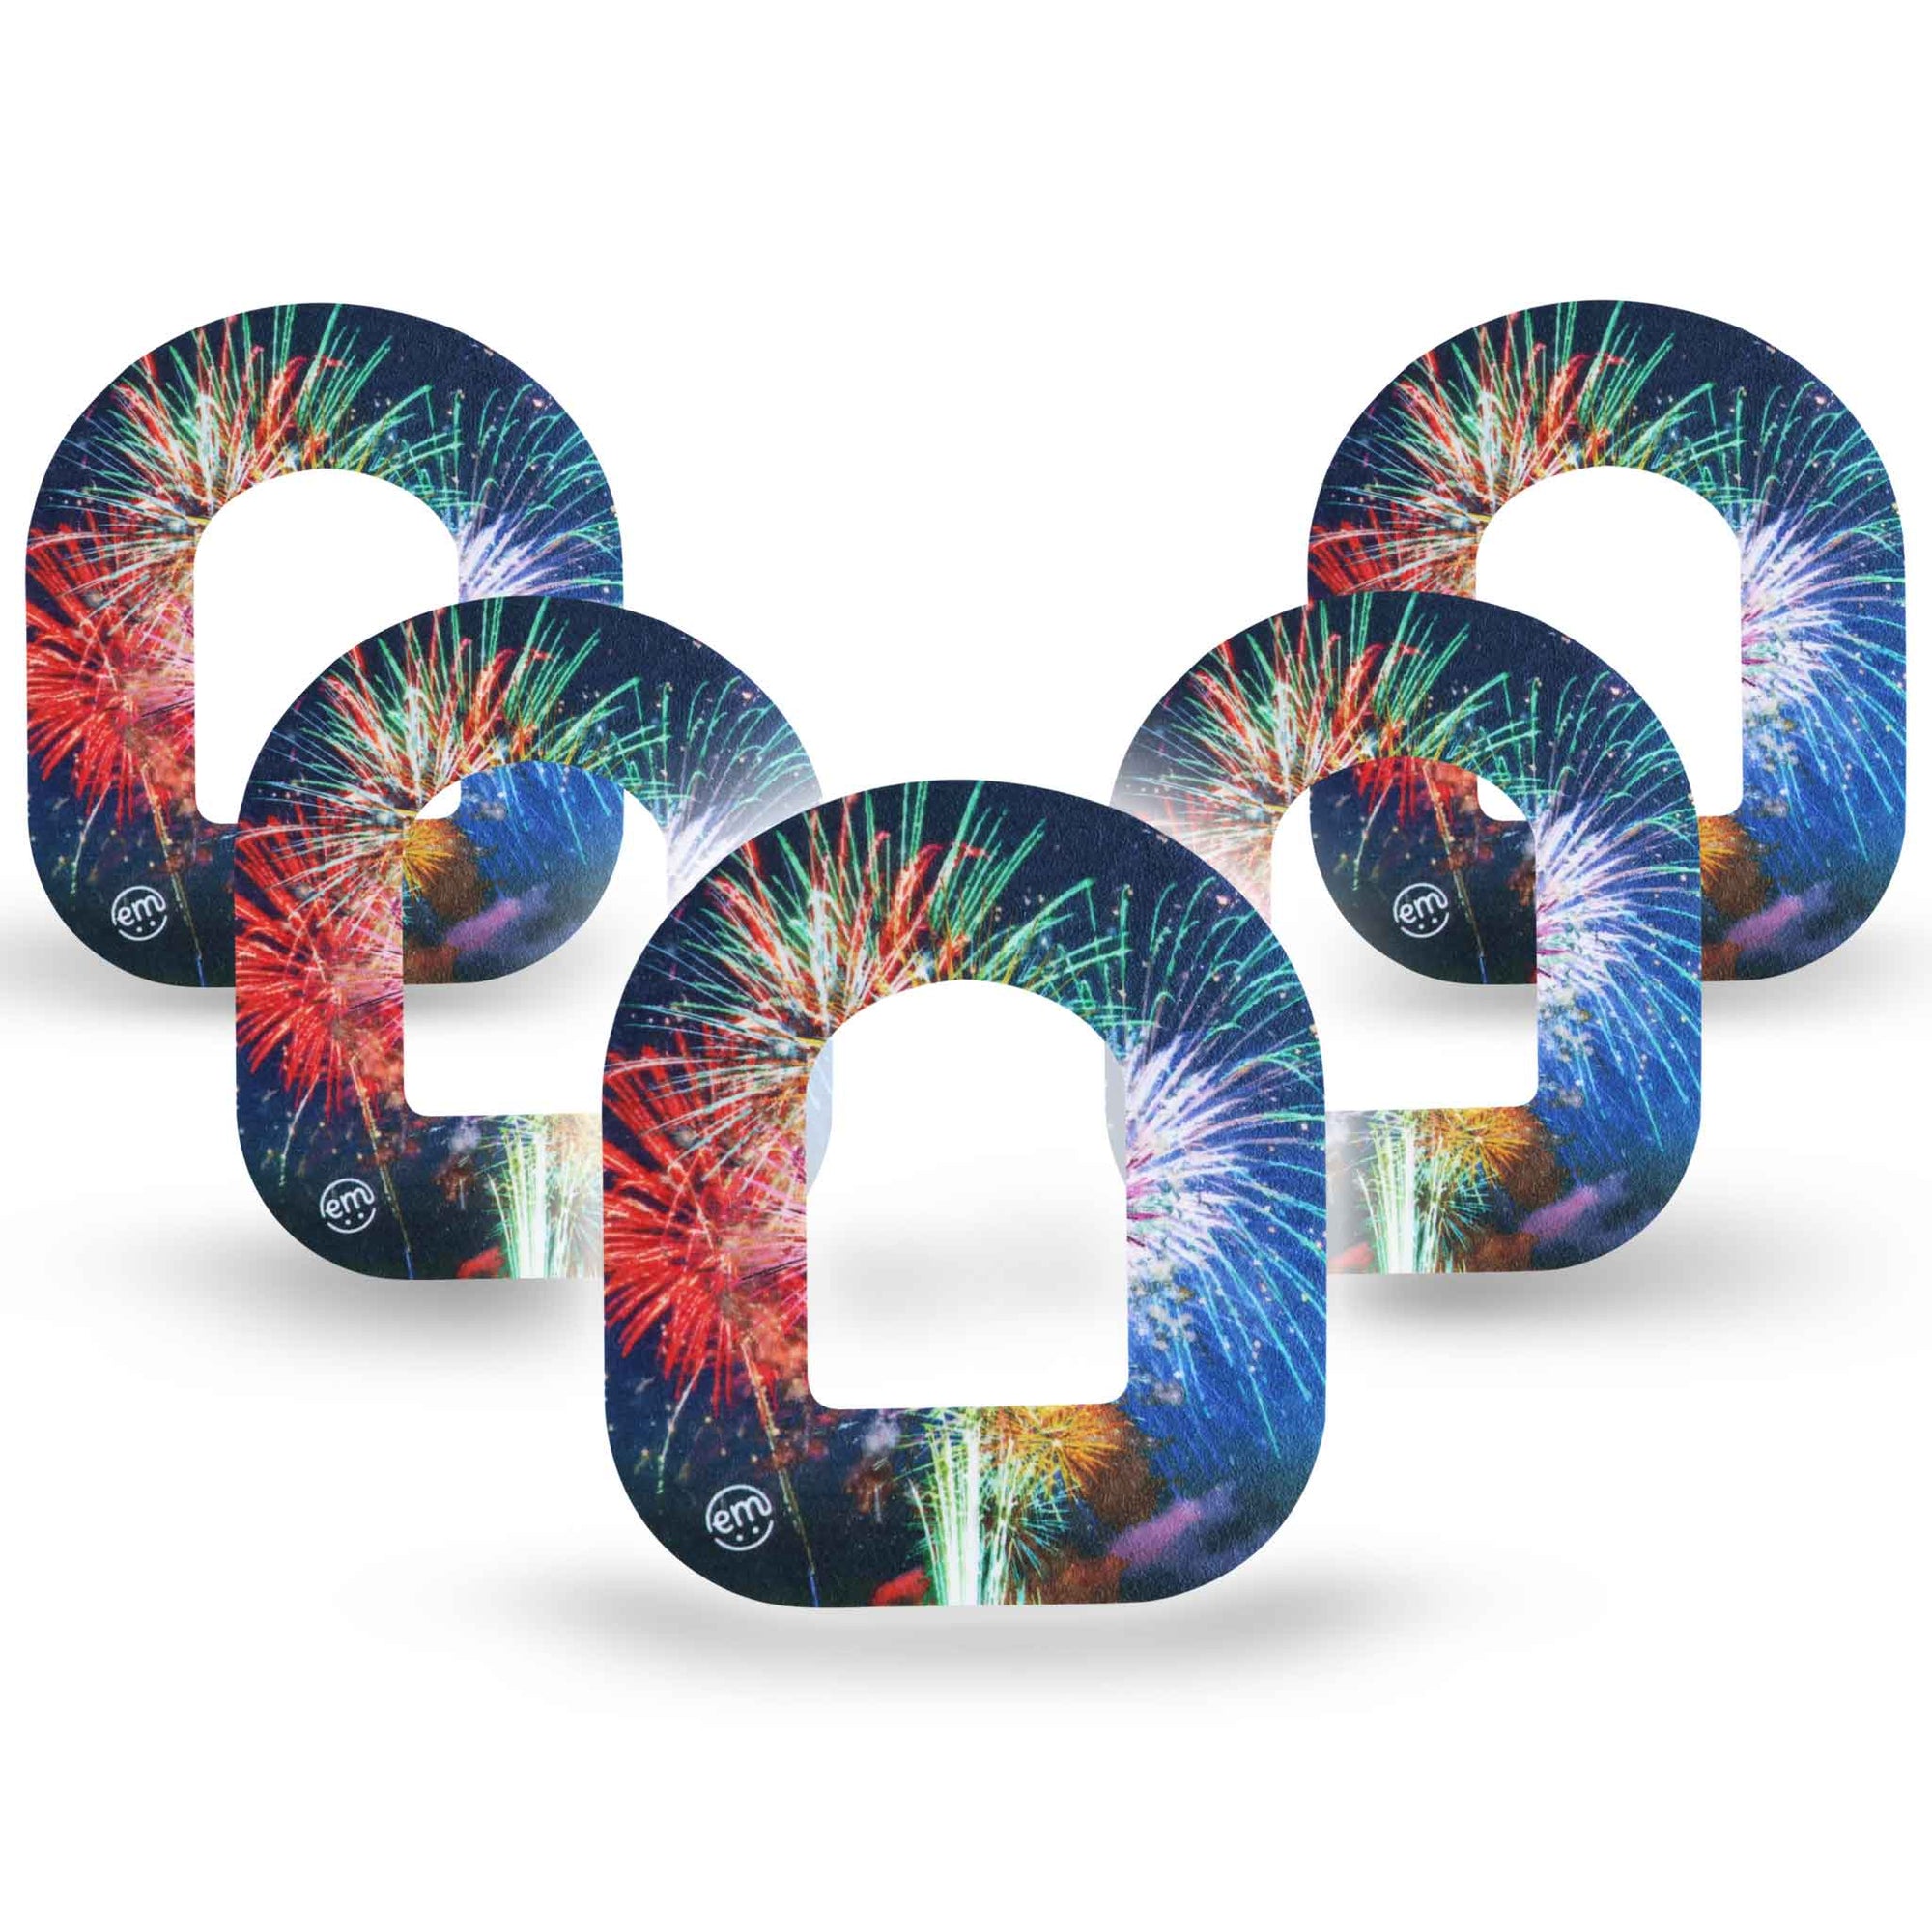 ExpressionMed Fireworks Pod Cover 5-Pack